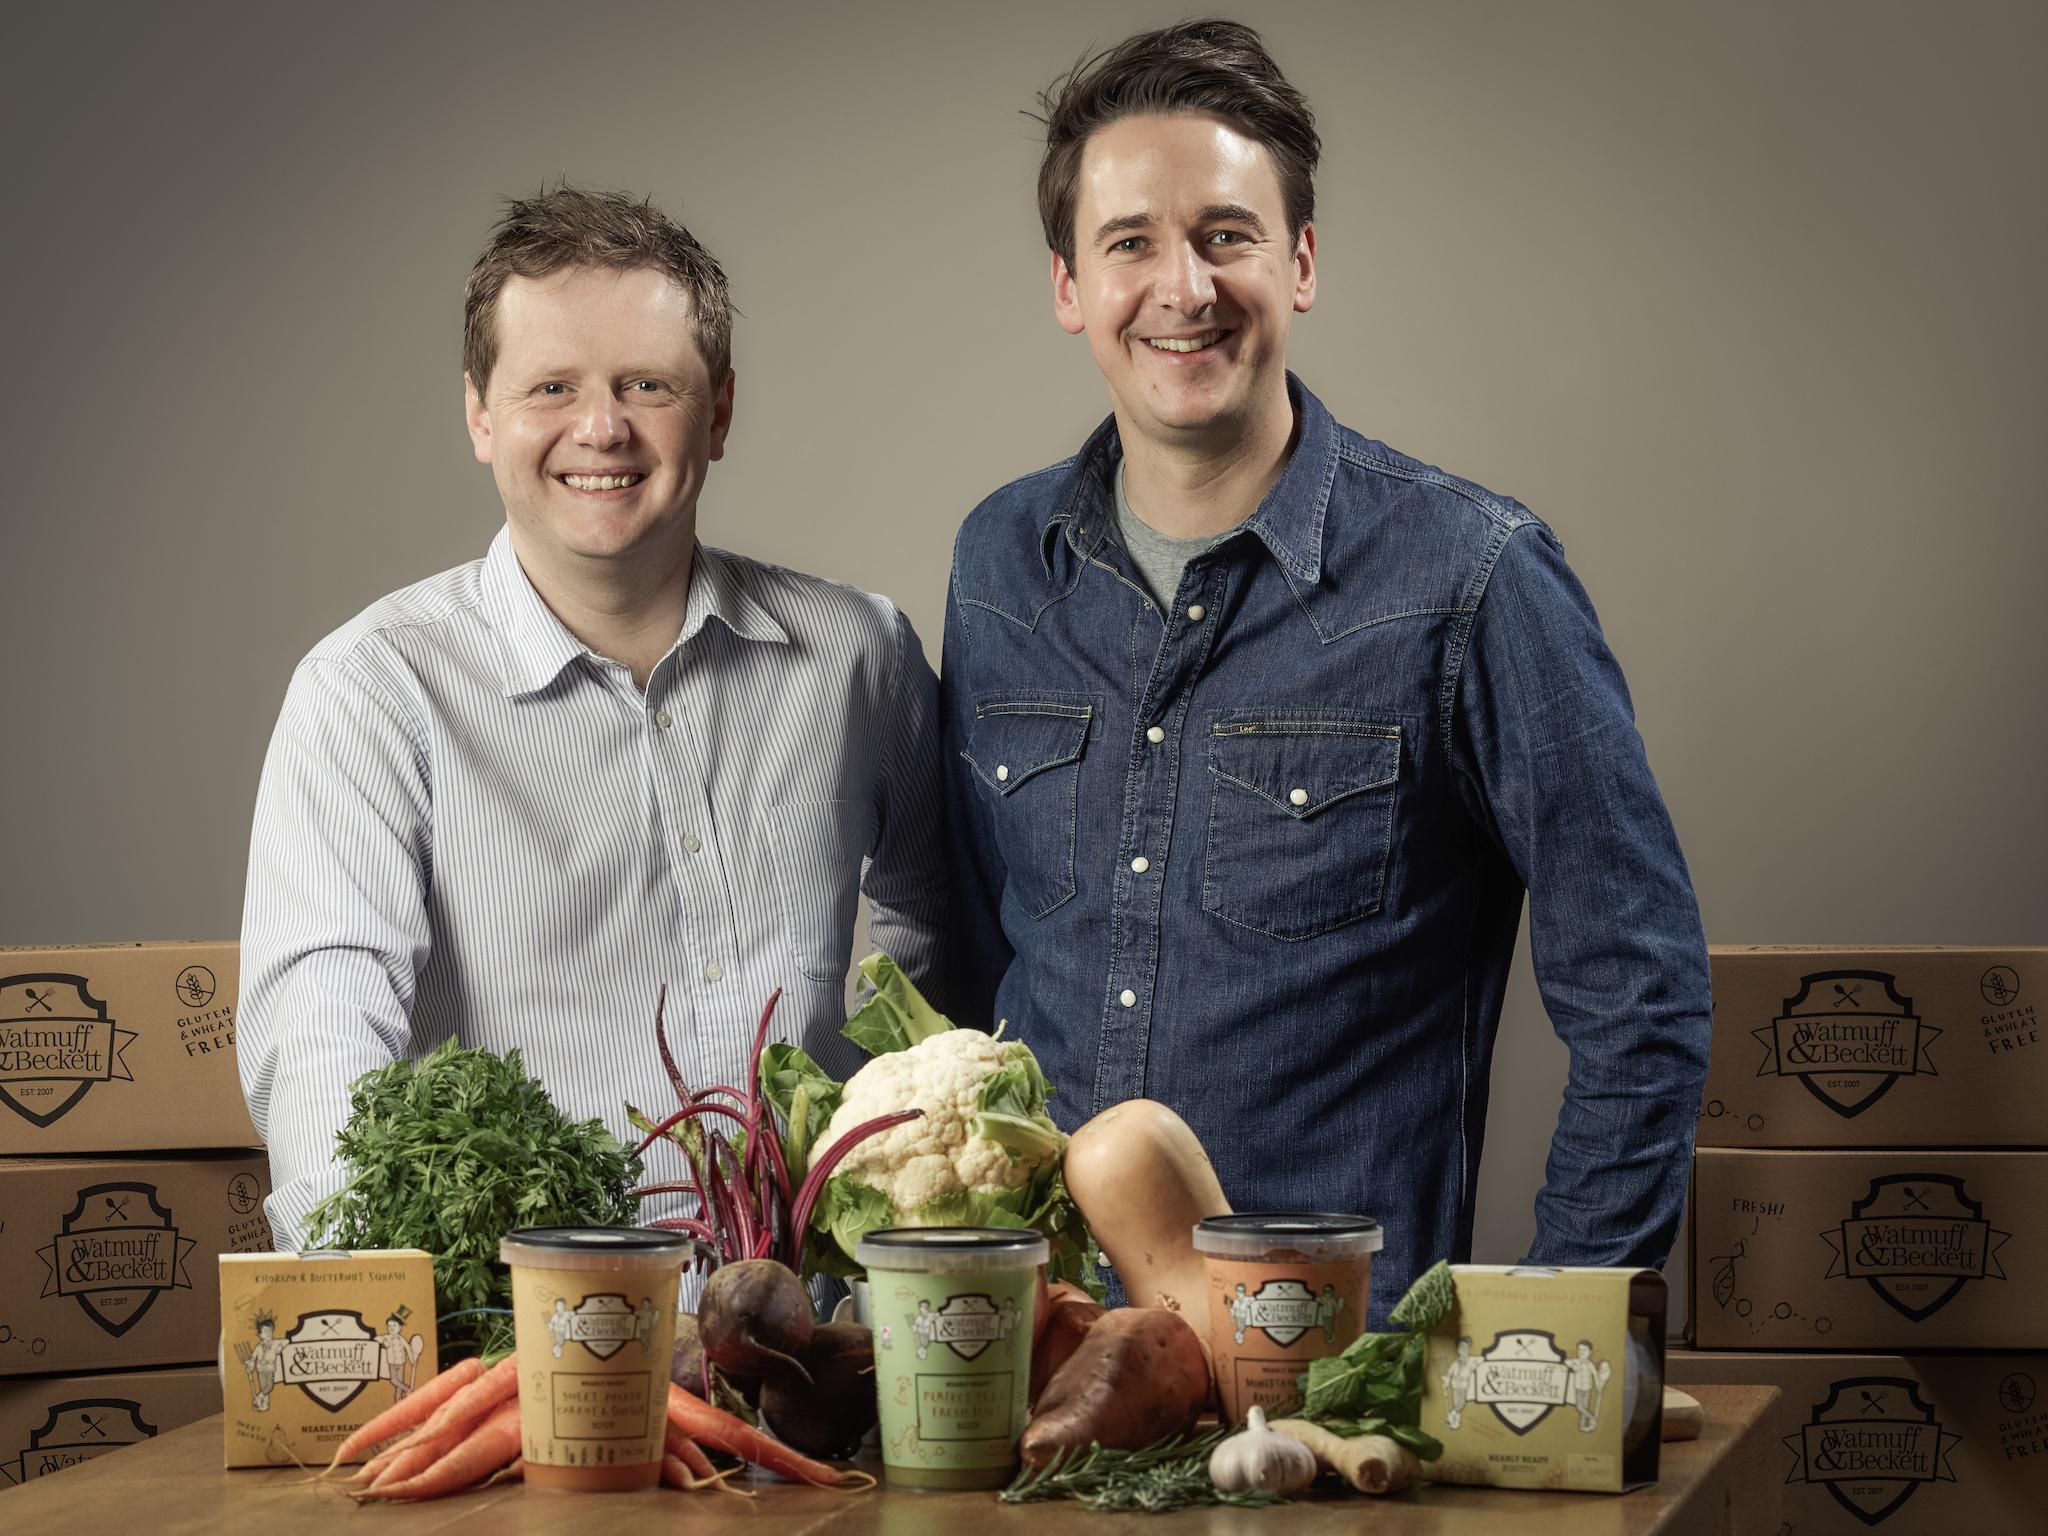 Watmuff & Beckett, a brand of upmarket ready meals, was founded in Bath six years ago by Andrew Watmuff and Michael Beckett